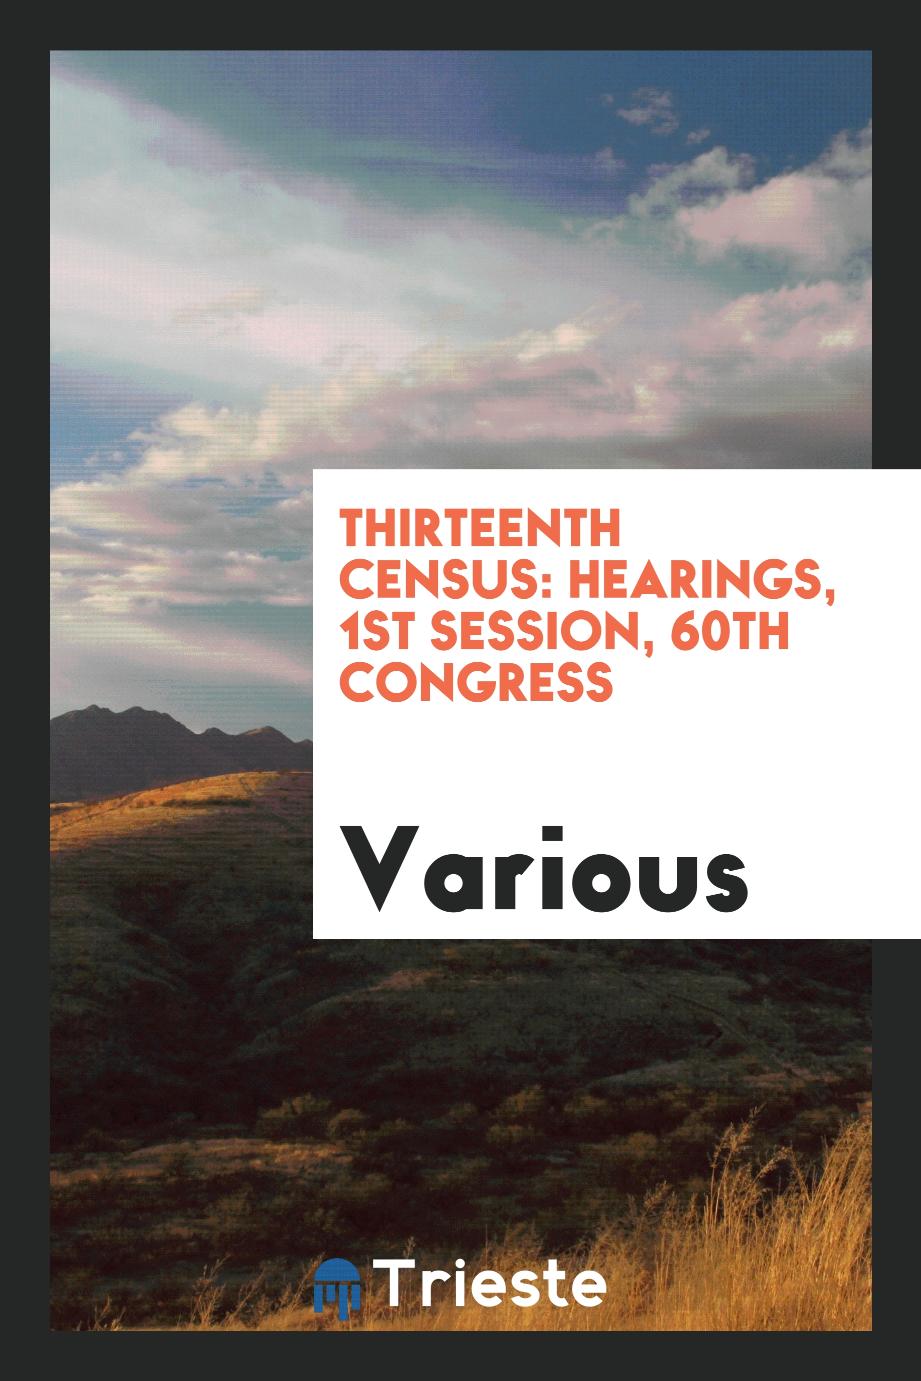 Thirteenth Census: Hearings, 1st Session, 60th Congress